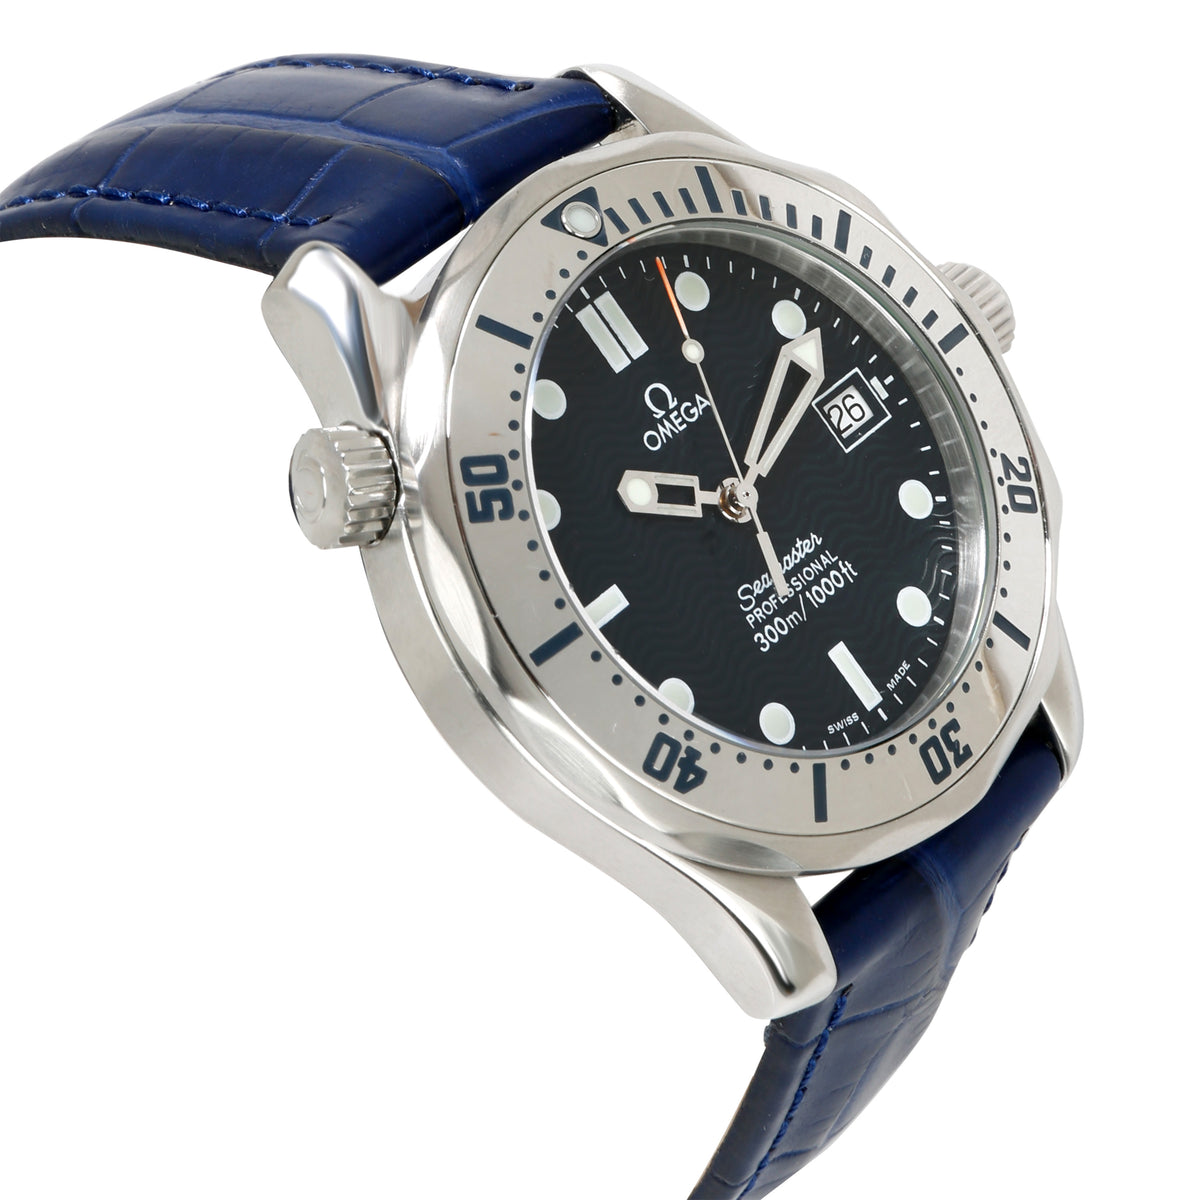 Omega Seamaster Pro 300M 2562.80 Unisex Watch in  Stainless Steel